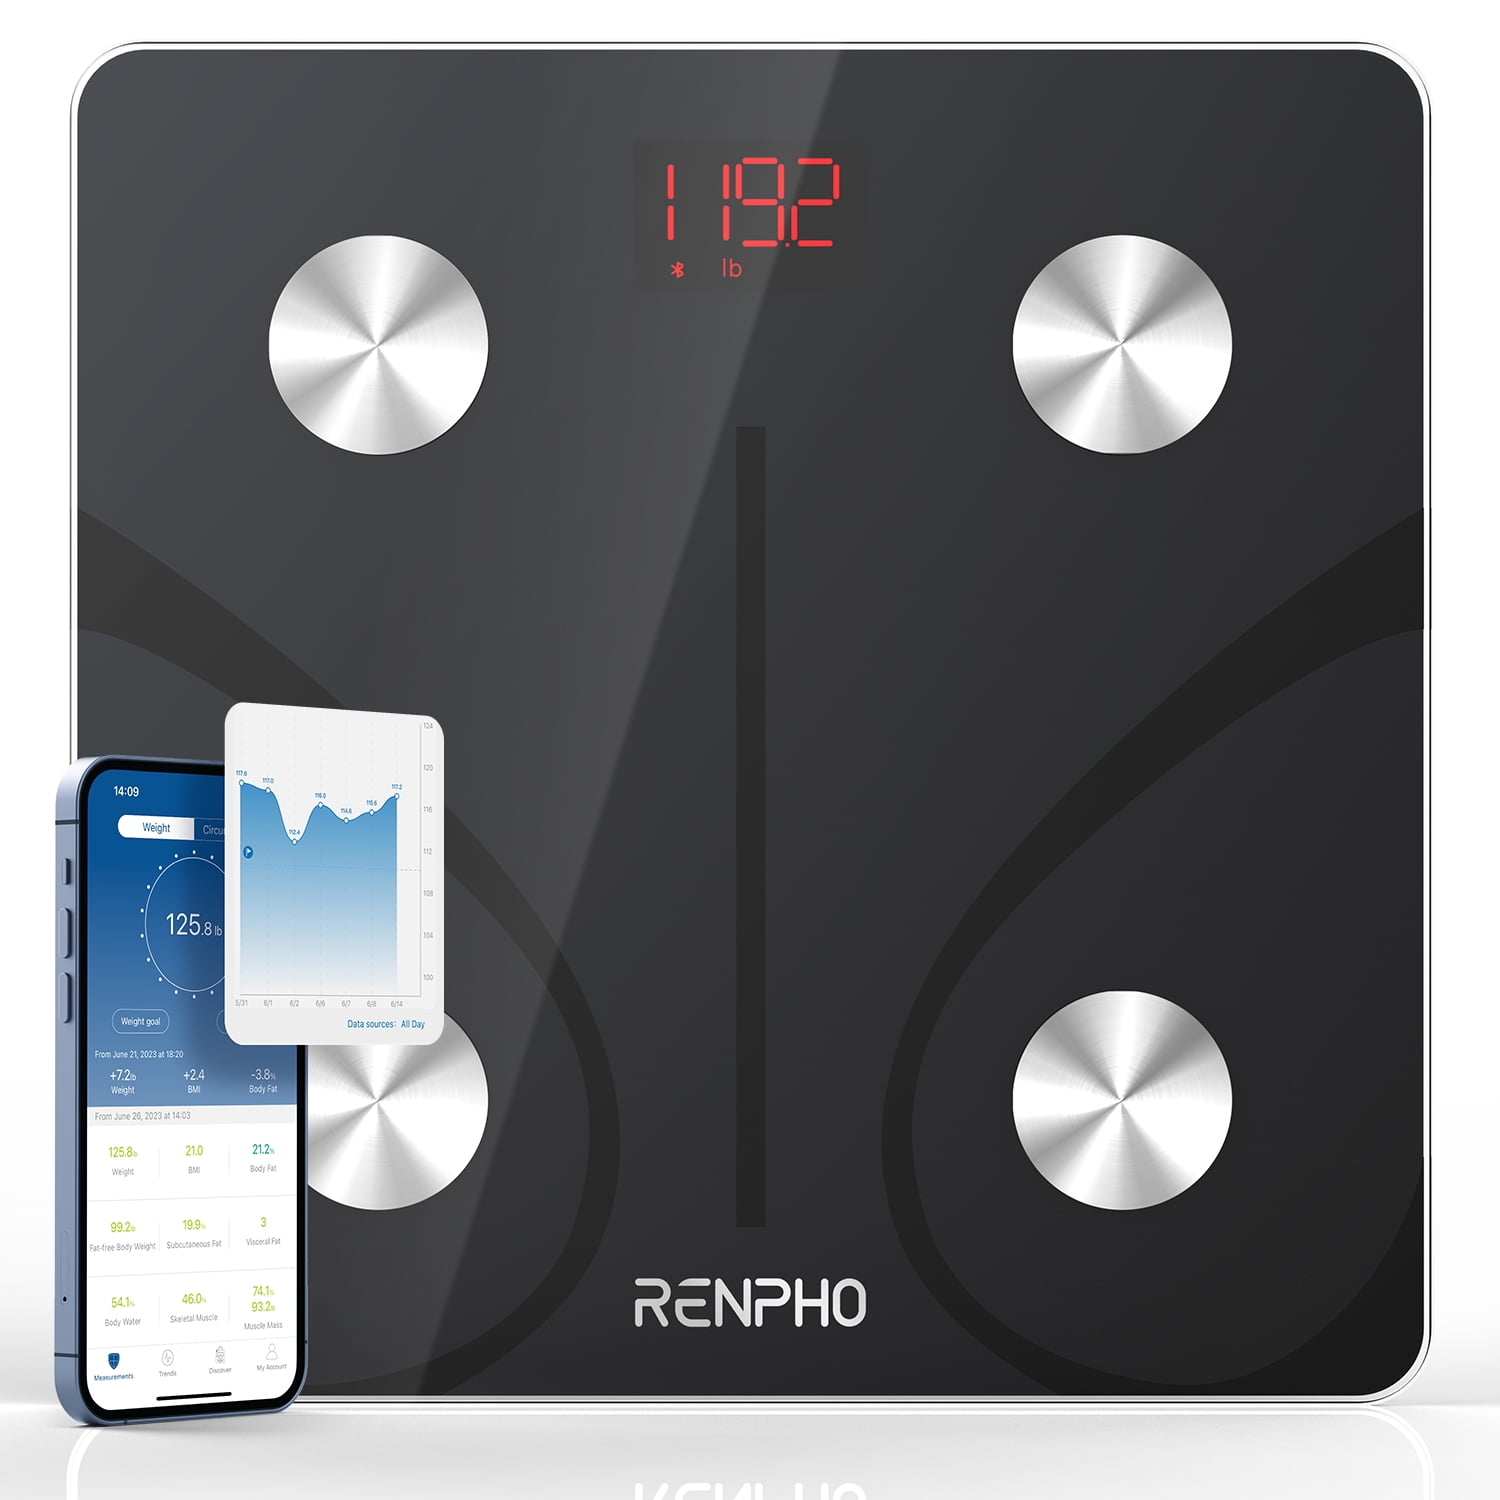 RENPHO Smart Bluetooth Body Fat Scale Review